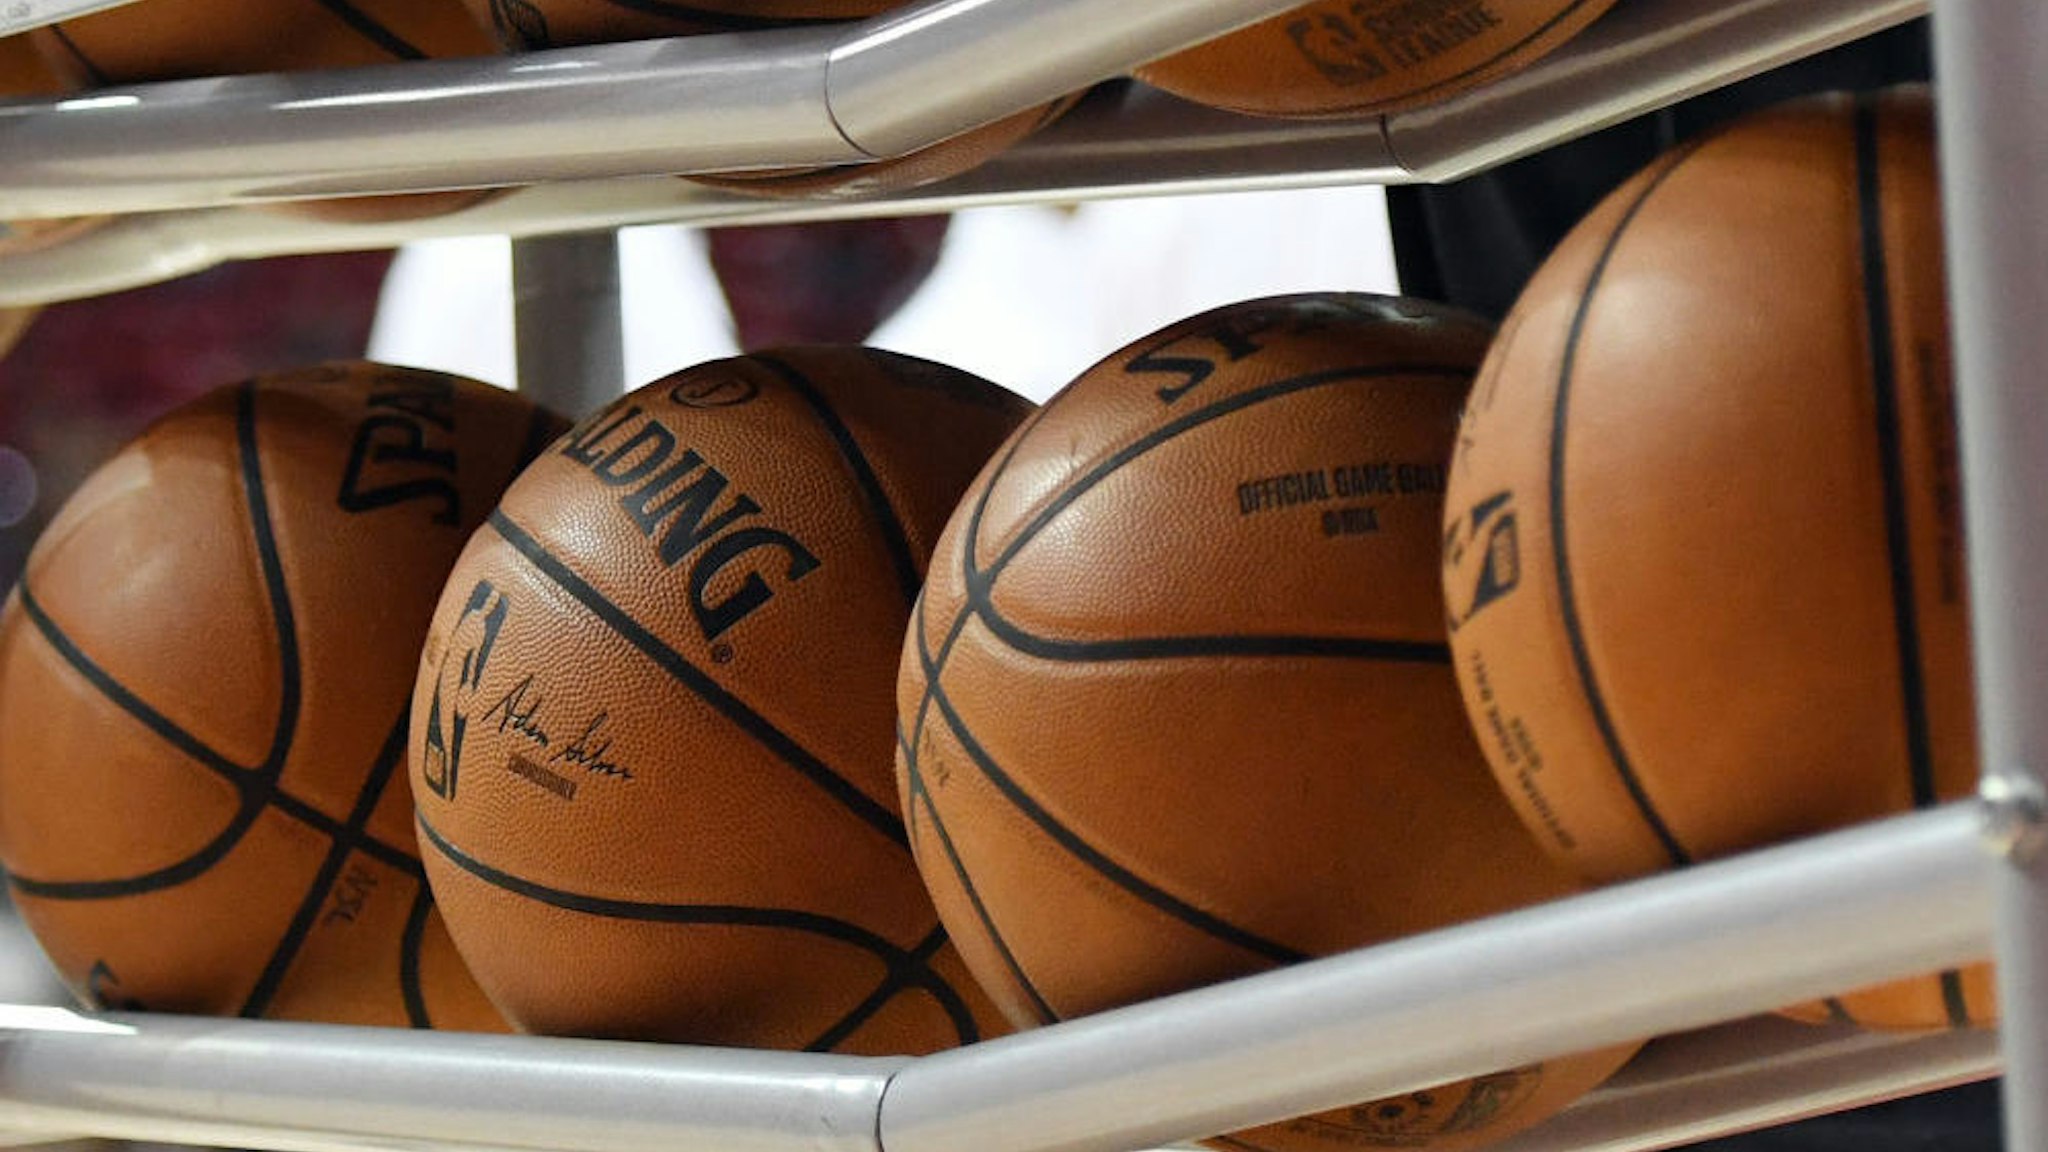 LAS VEGAS, NEVADA - JULY 06: Basketballs are shown in a ball rack before a game between the Washington Wizards and the New Orleans Pelicans during the 2019 NBA Summer League at the Thomas &amp; Mack Center on July 6, 2019 in Las Vegas, Nevada. NOTE TO USER: User expressly acknowledges and agrees that, by downloading and or using this photograph, User is consenting to the terms and conditions of the Getty Images License Agreement.